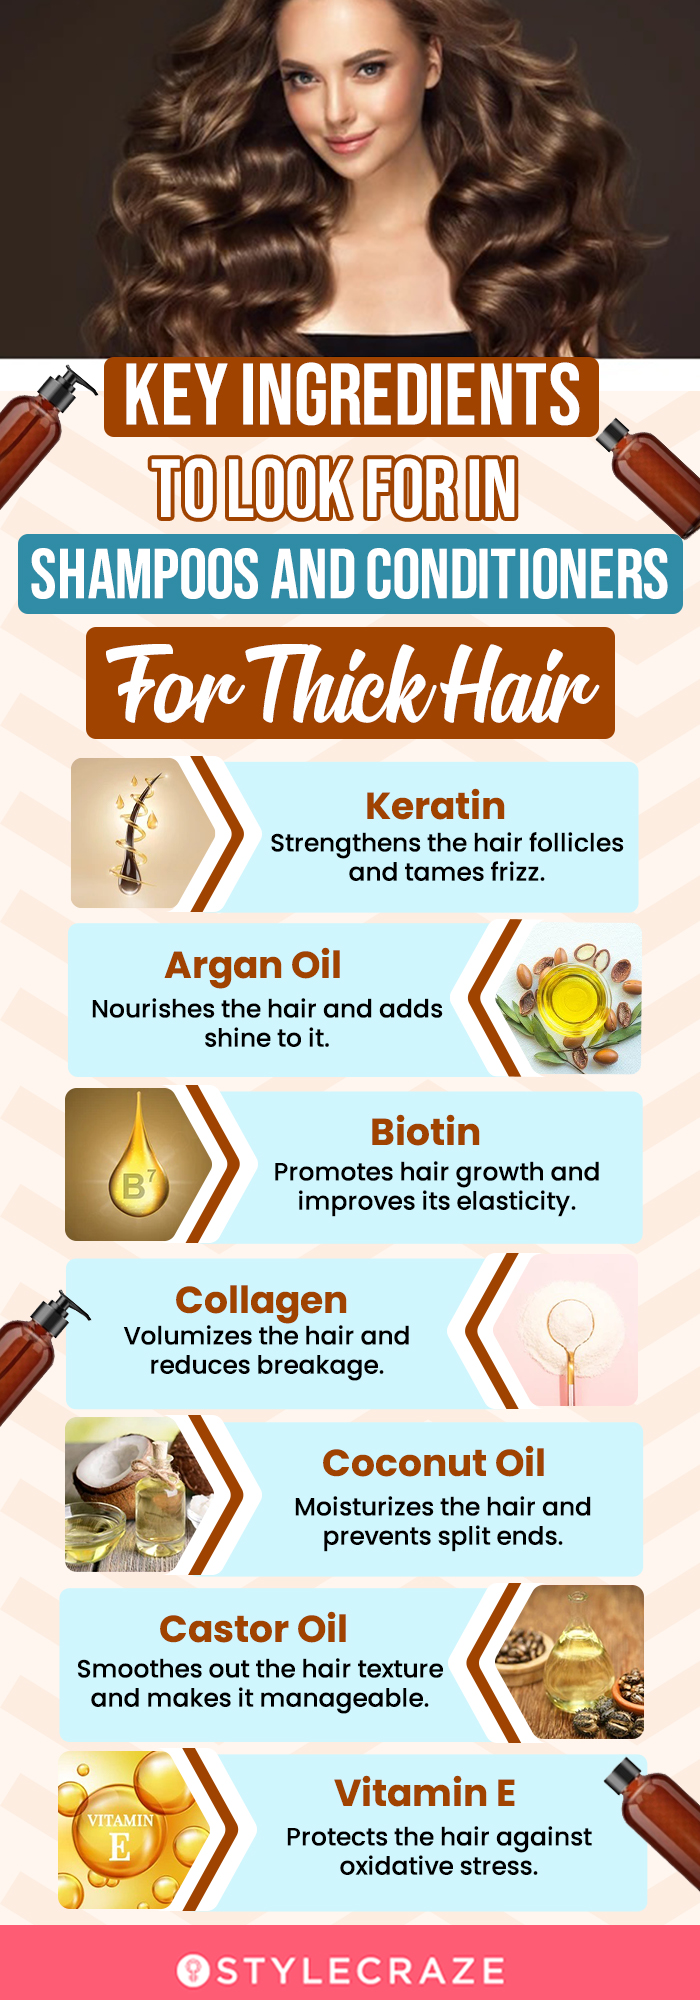 Key Ingredients To Look For In Shampoos and Conditioners For Thick Hair (infographic)